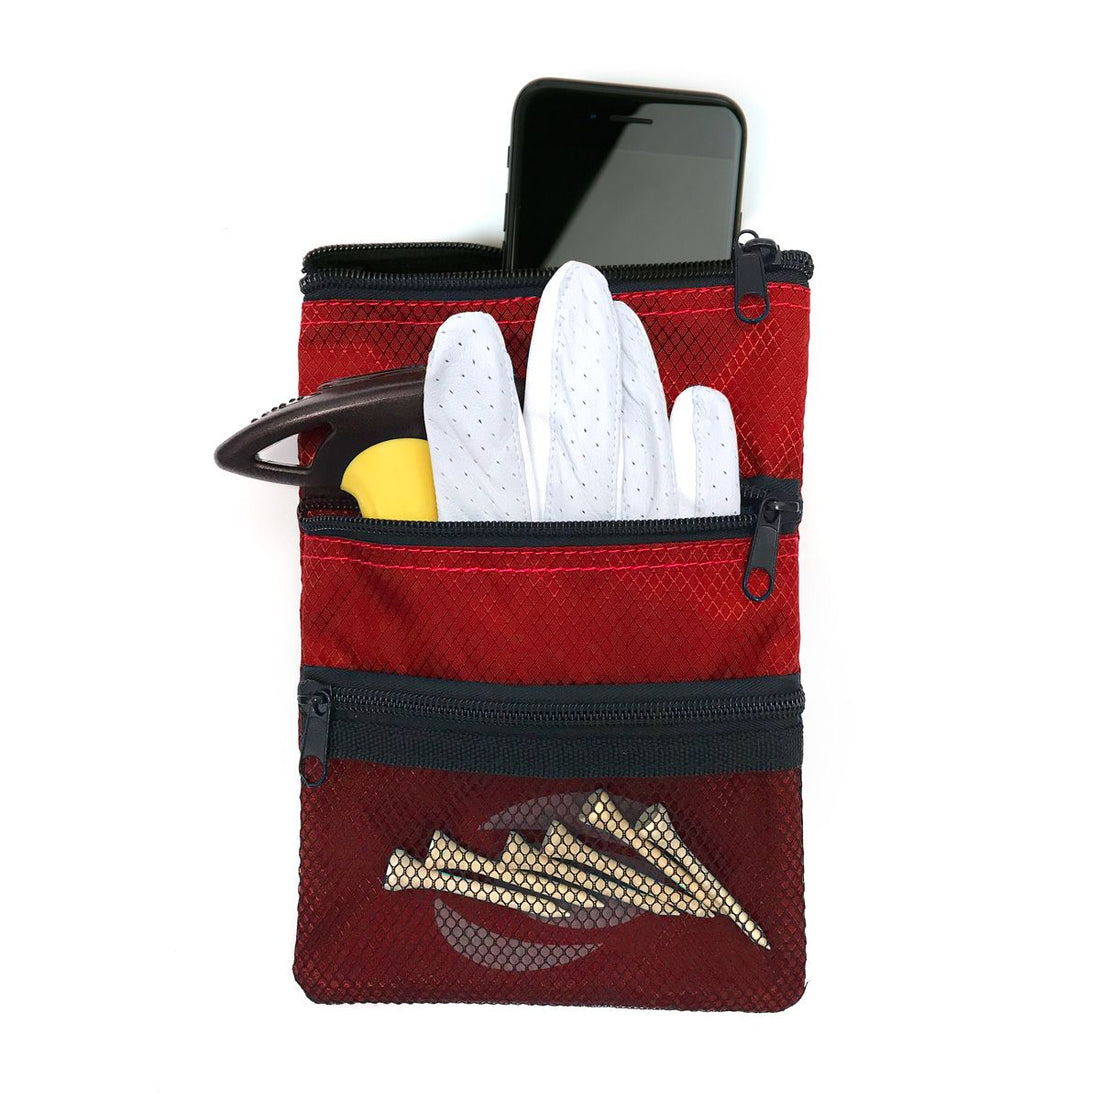 front view of a red Orlimar Golf Detachable Accessory Pouch with cell phone, white glove and 6 natural golf tees inside the mesh pocket